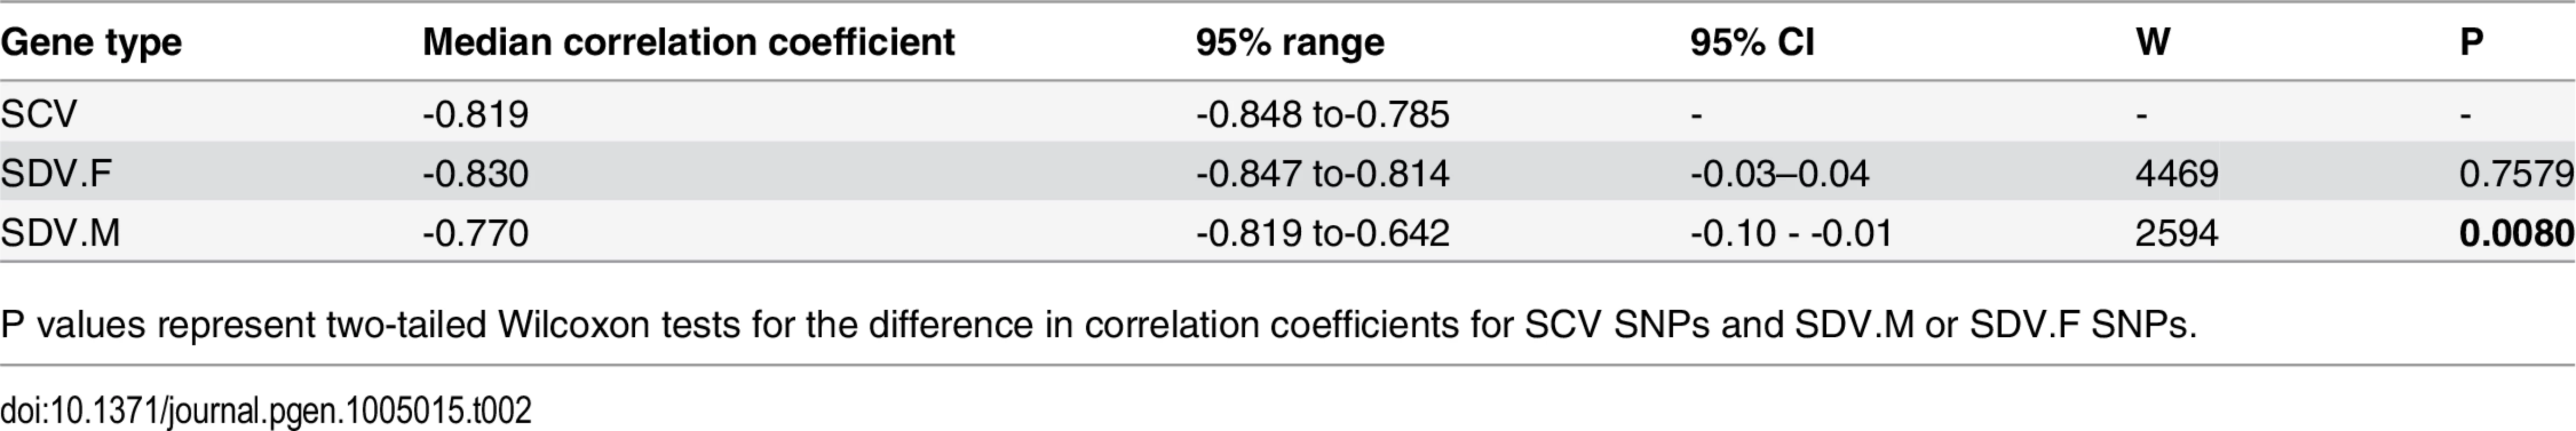 Correlation of effect size and minor allele frequency.